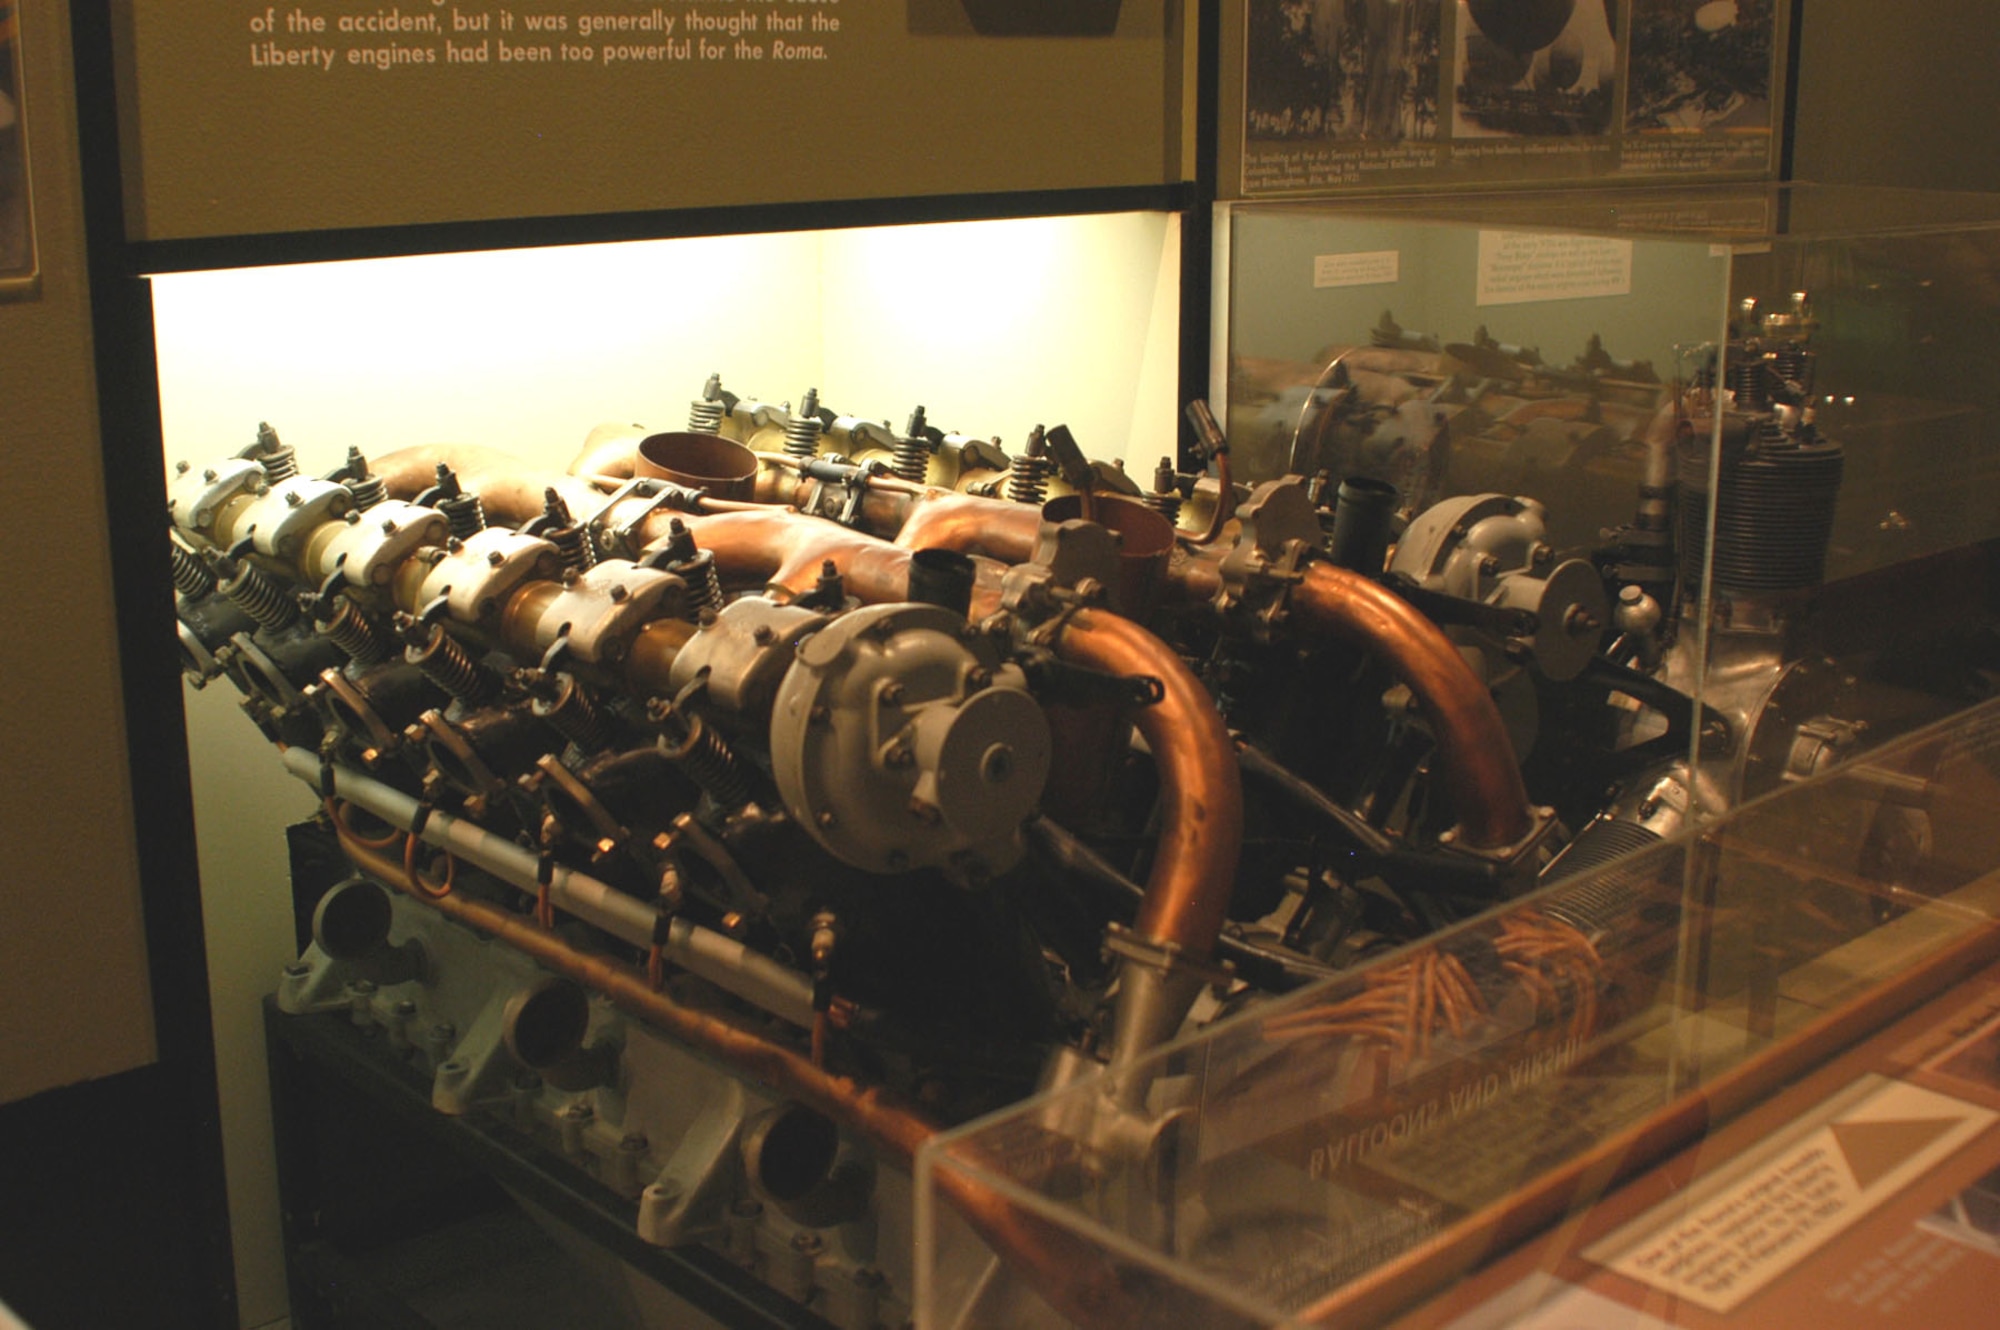 DAYTON, Ohio -- Ansaldo engine on display in the Early Years Gallery at the National Museum of the United States Air Force. (U.S. Air Force photo)